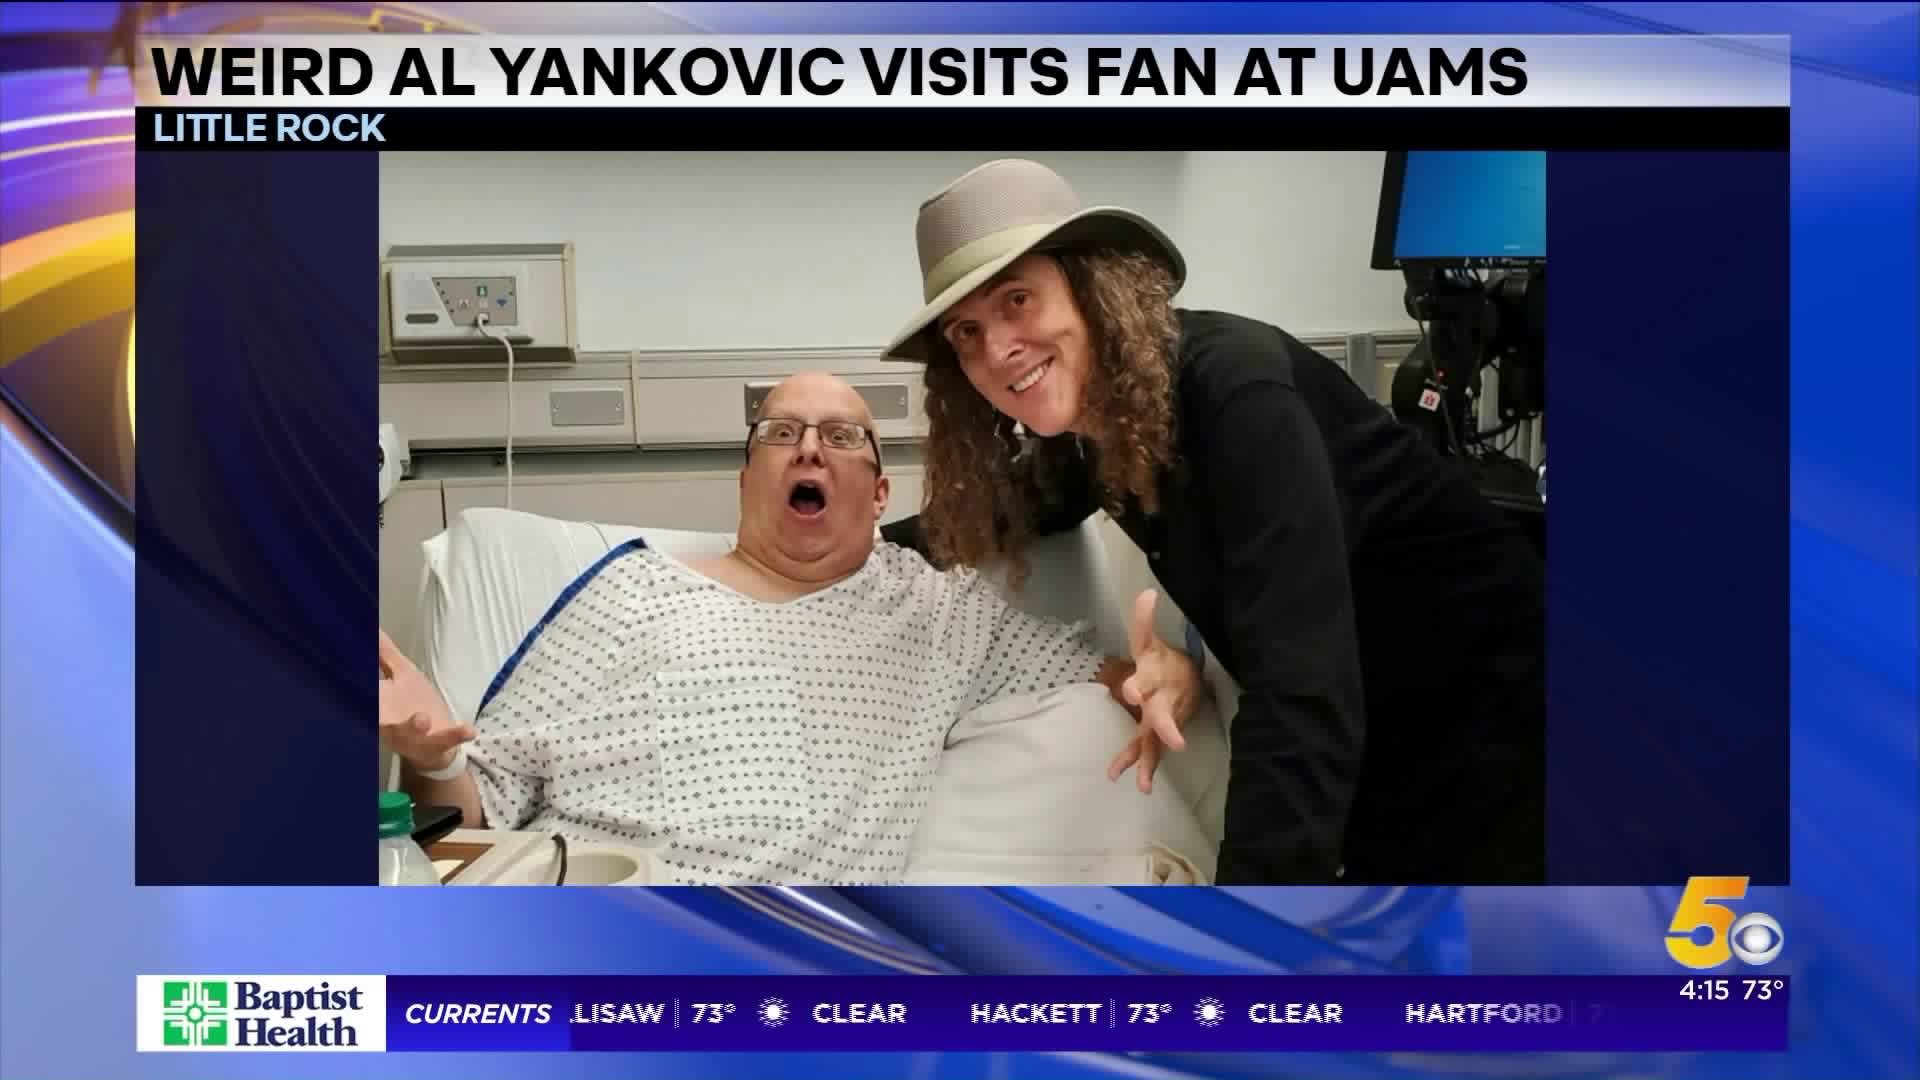 Longtime Fan Undergoing Cancer Treatments At UAMS Surprised By Visit From Weird Al Yankovic